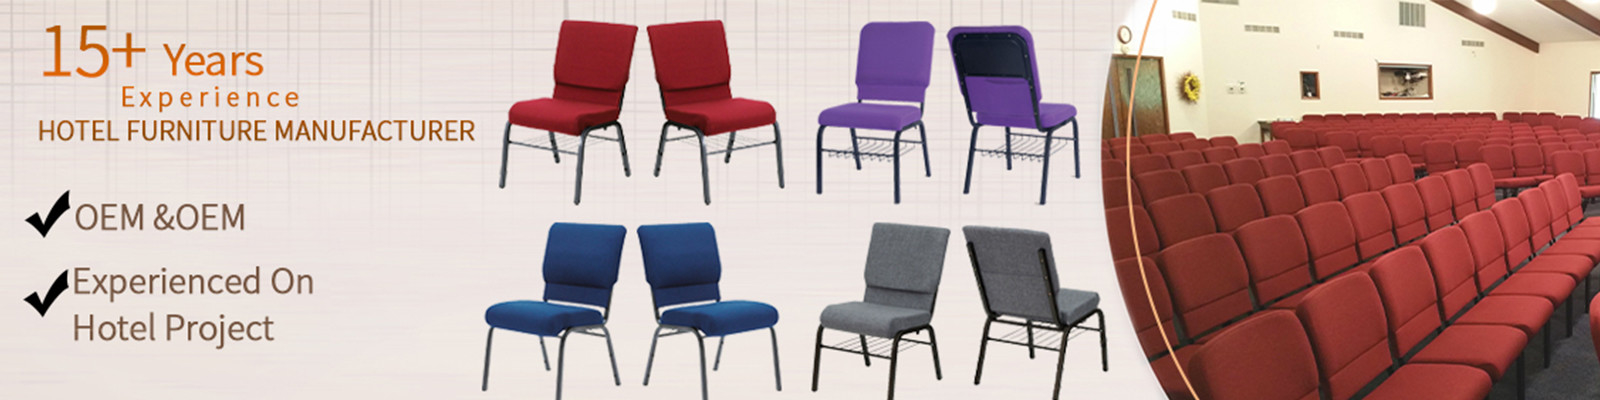 Stackable Church Chairs